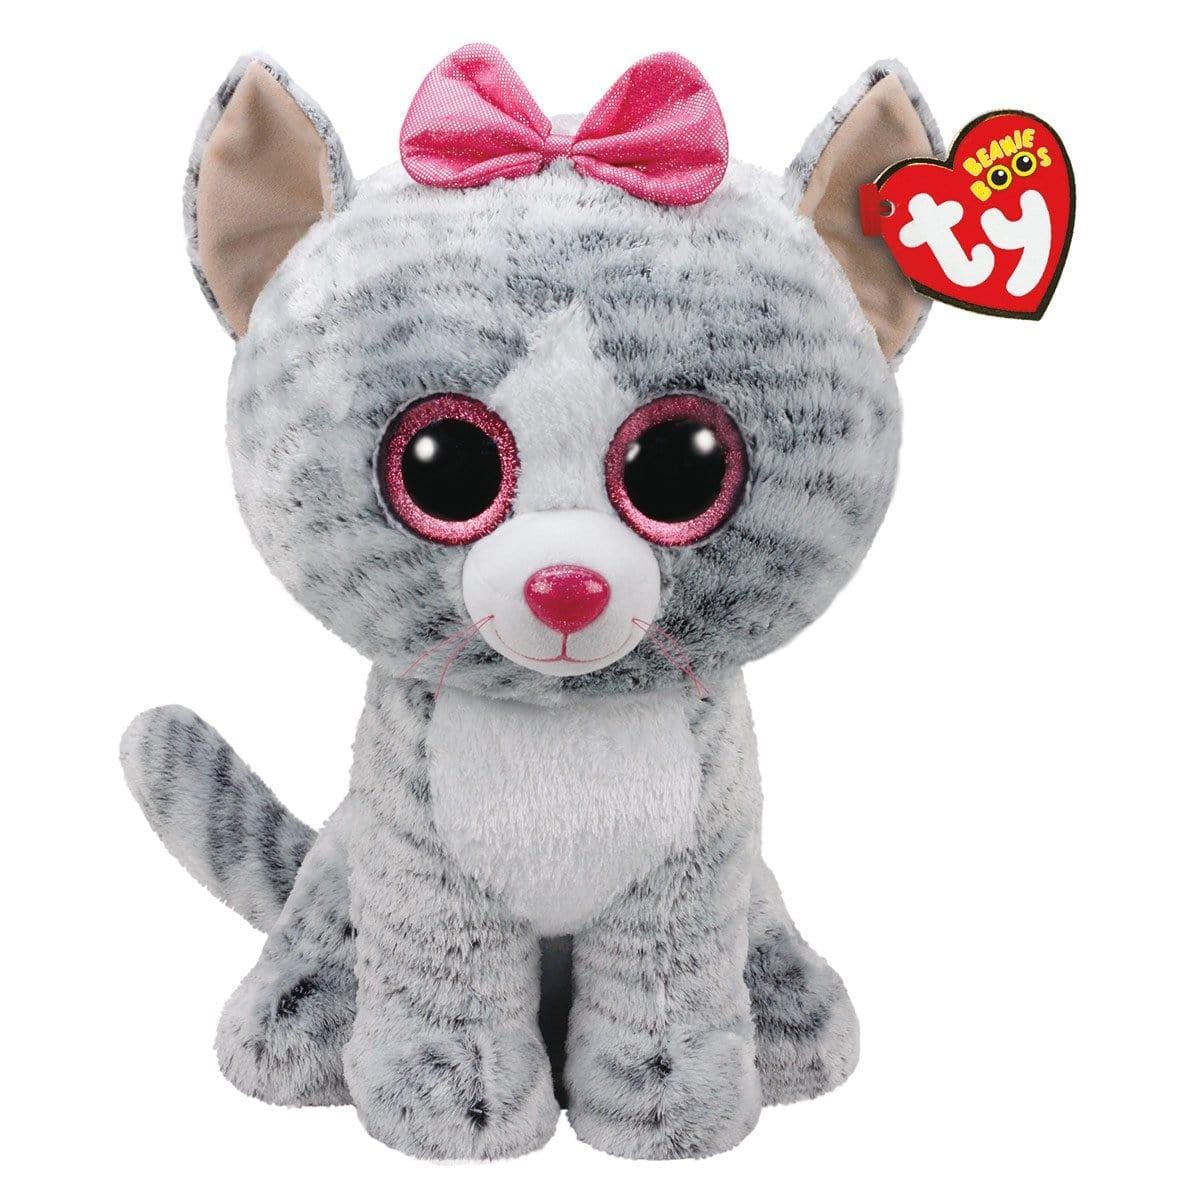 Buy Plushes Beanie Boo Large - Kiki sold at Party Expert